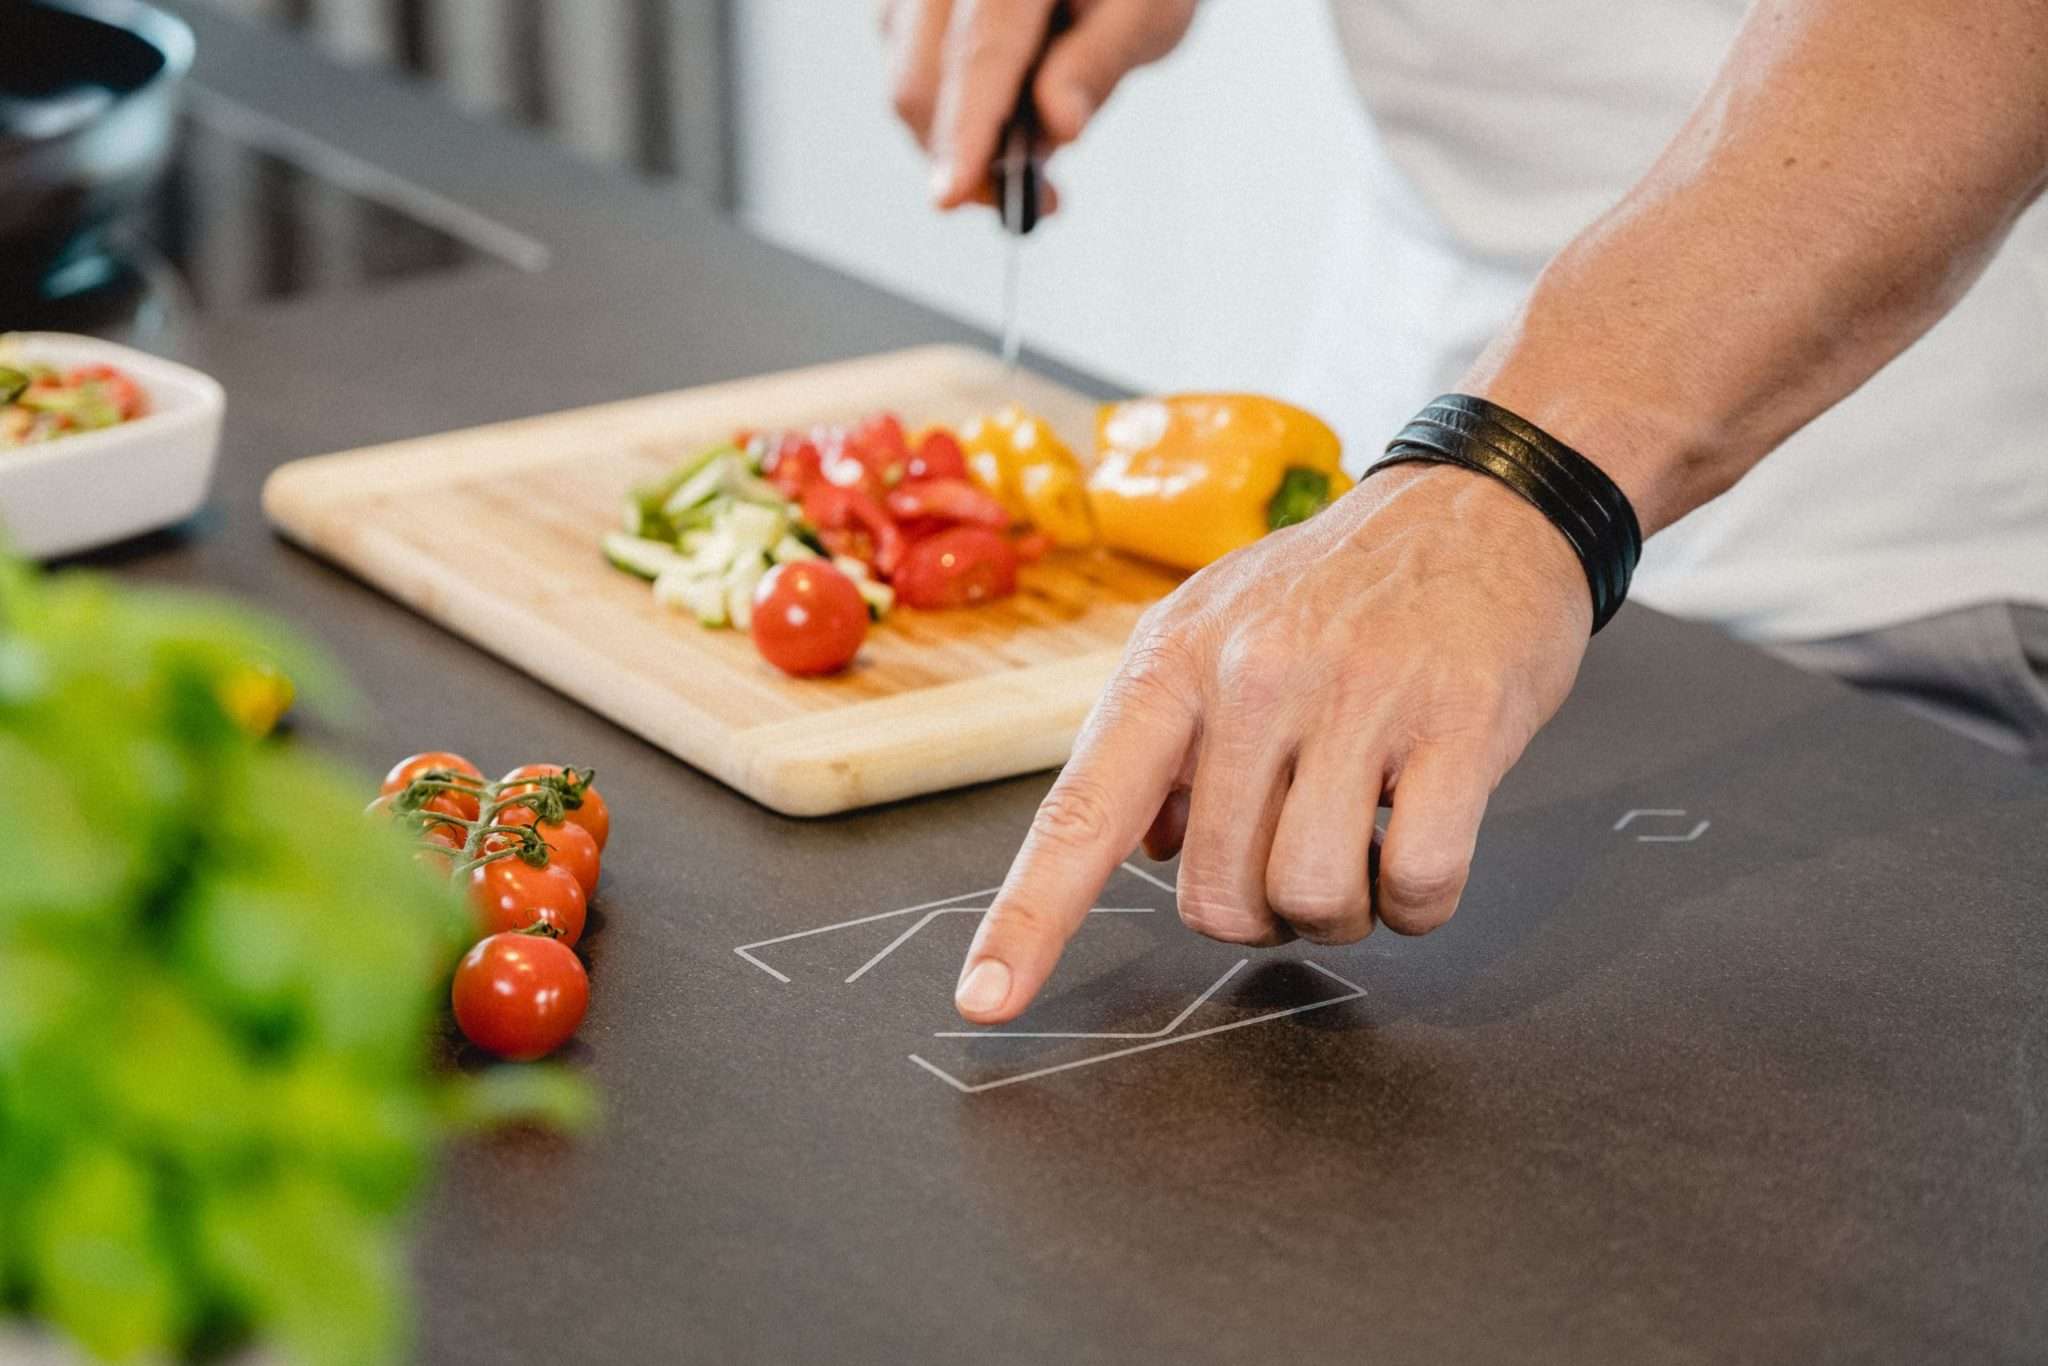 cLoxone_kitchen-man-cooking-touch-surface